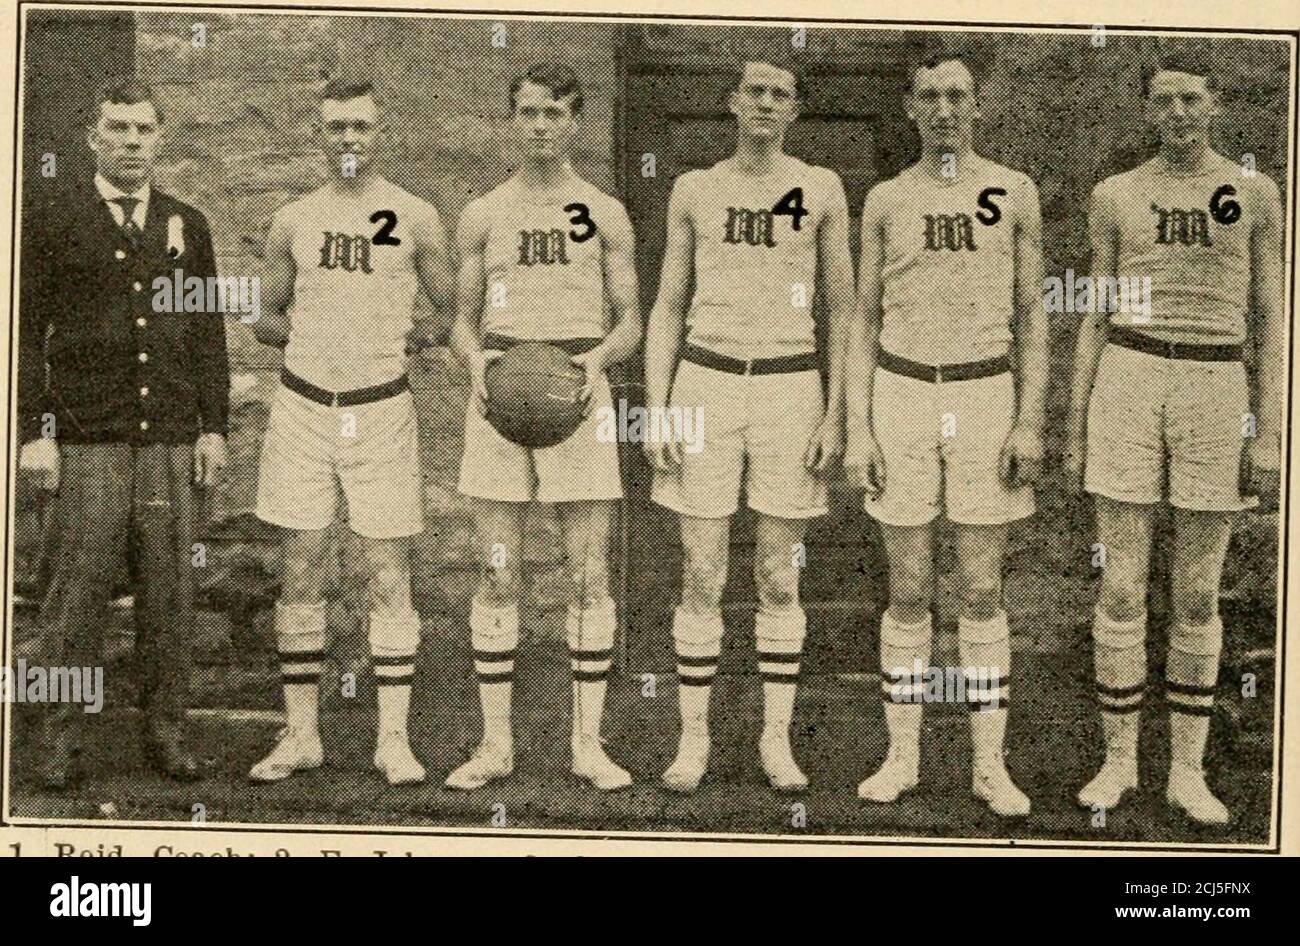 . Spalding's official collegiate basket ball guide . 1. Tan Brooklin. M^r. • Dqvirl- rni^,. i^ r^ i ^ ^ ST. LAWRENCE UNIVERSITY. 9, Billings; 10, Dodds.. 1. Reid. Coach6, Schulz. E. Johnson; 3. Grier, Capt.; 4, Moorehead; 5. F. Johnson;MONMOUTH (ILL.) COLLEGE. SPALDINGS ATHLETIC LIBRARY. 128 Records of Series Between Some of theLeading Colleges COLUMBIA—YALE. ioAi Ao (Columbia, 3;1901-02 ^Columbia. 19;iaoo ^9 (Columbia, 12;1902-03 ^Columbia. 16;^QM—(A jColumbia. 21;1903-04 -[Columbia, 21;iort^ ftr (Columbia, 14;1904-05 -[Columbia. 24;lonpi—nfi i Columbia, 26;1905—06 -^Columbia, 15; Yale, 48.Y Stock Photo